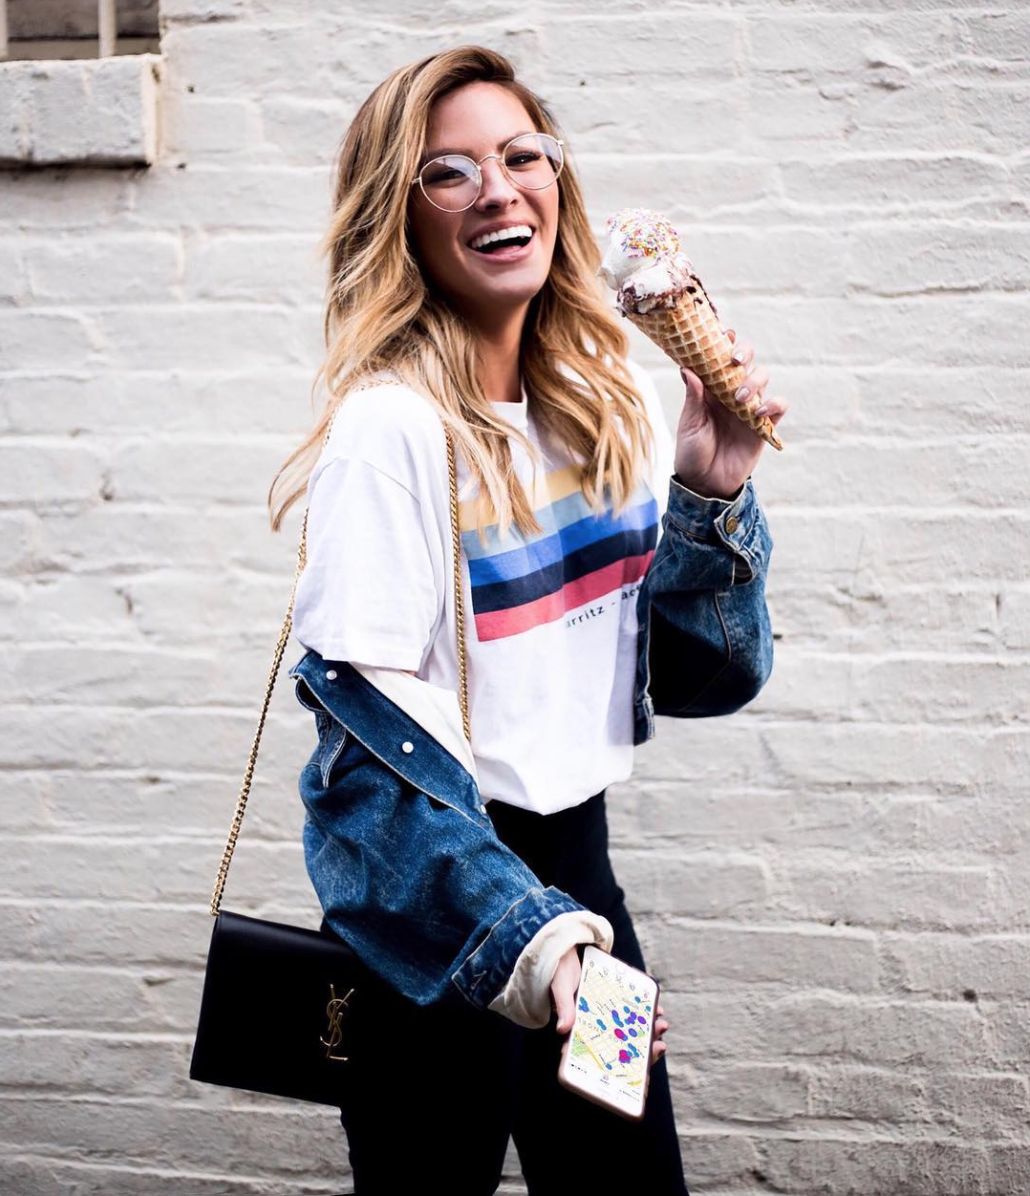 Brunch in NYC — The Best Spots According to 7 Fashion Bloggers! | Life ...